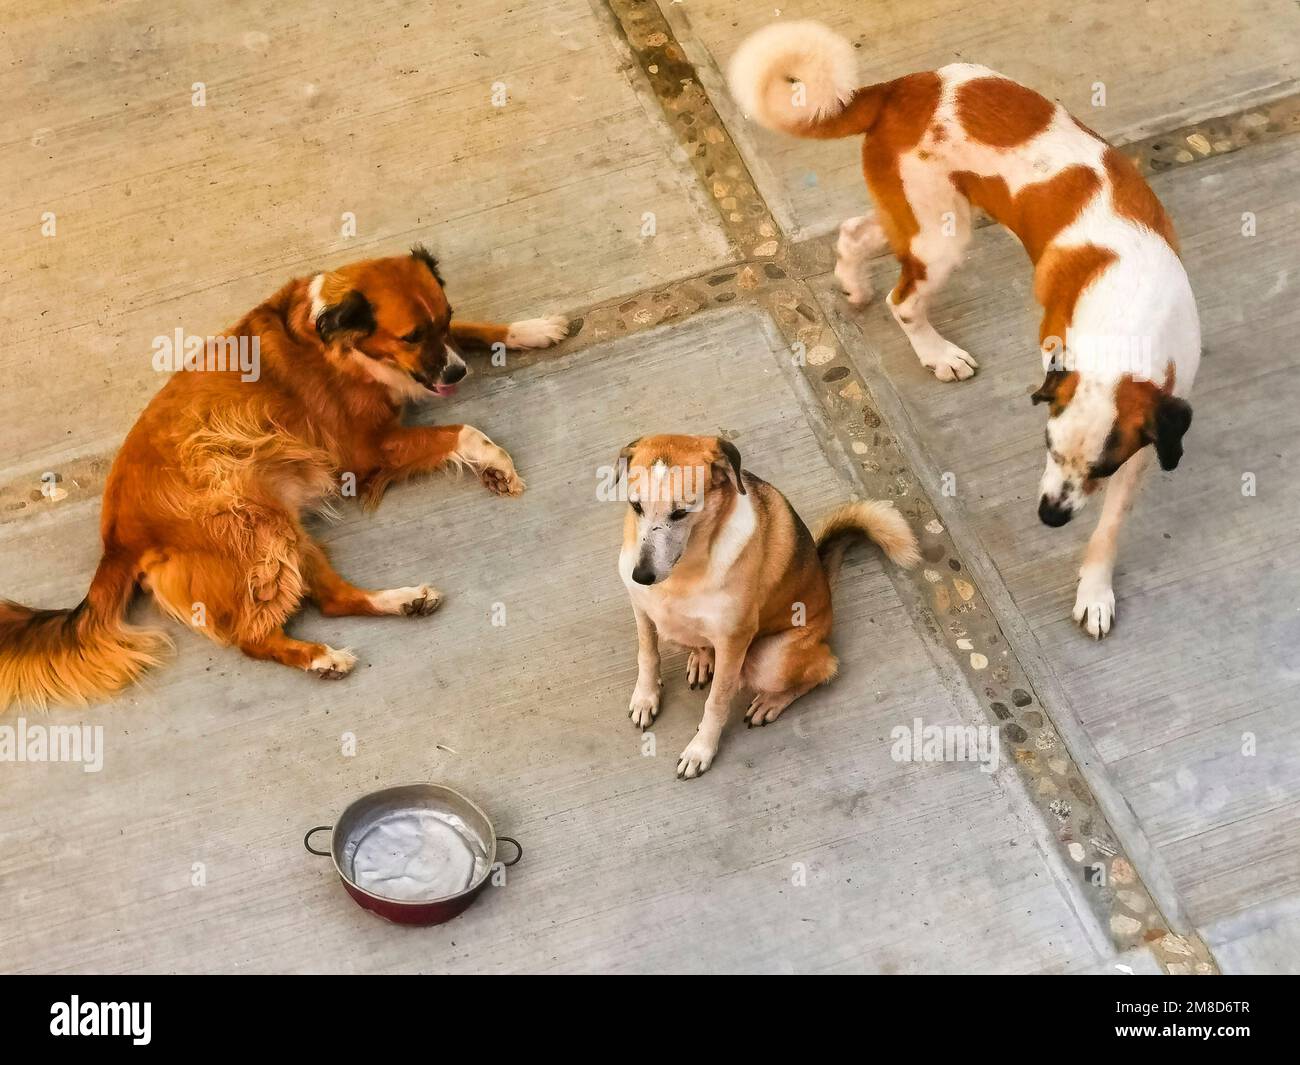 https://c8.alamy.com/comp/2M8D6TR/tired-lazy-big-dogs-lying-around-after-eating-in-zicatela-puerto-escondido-oaxaca-mexico-2M8D6TR.jpg